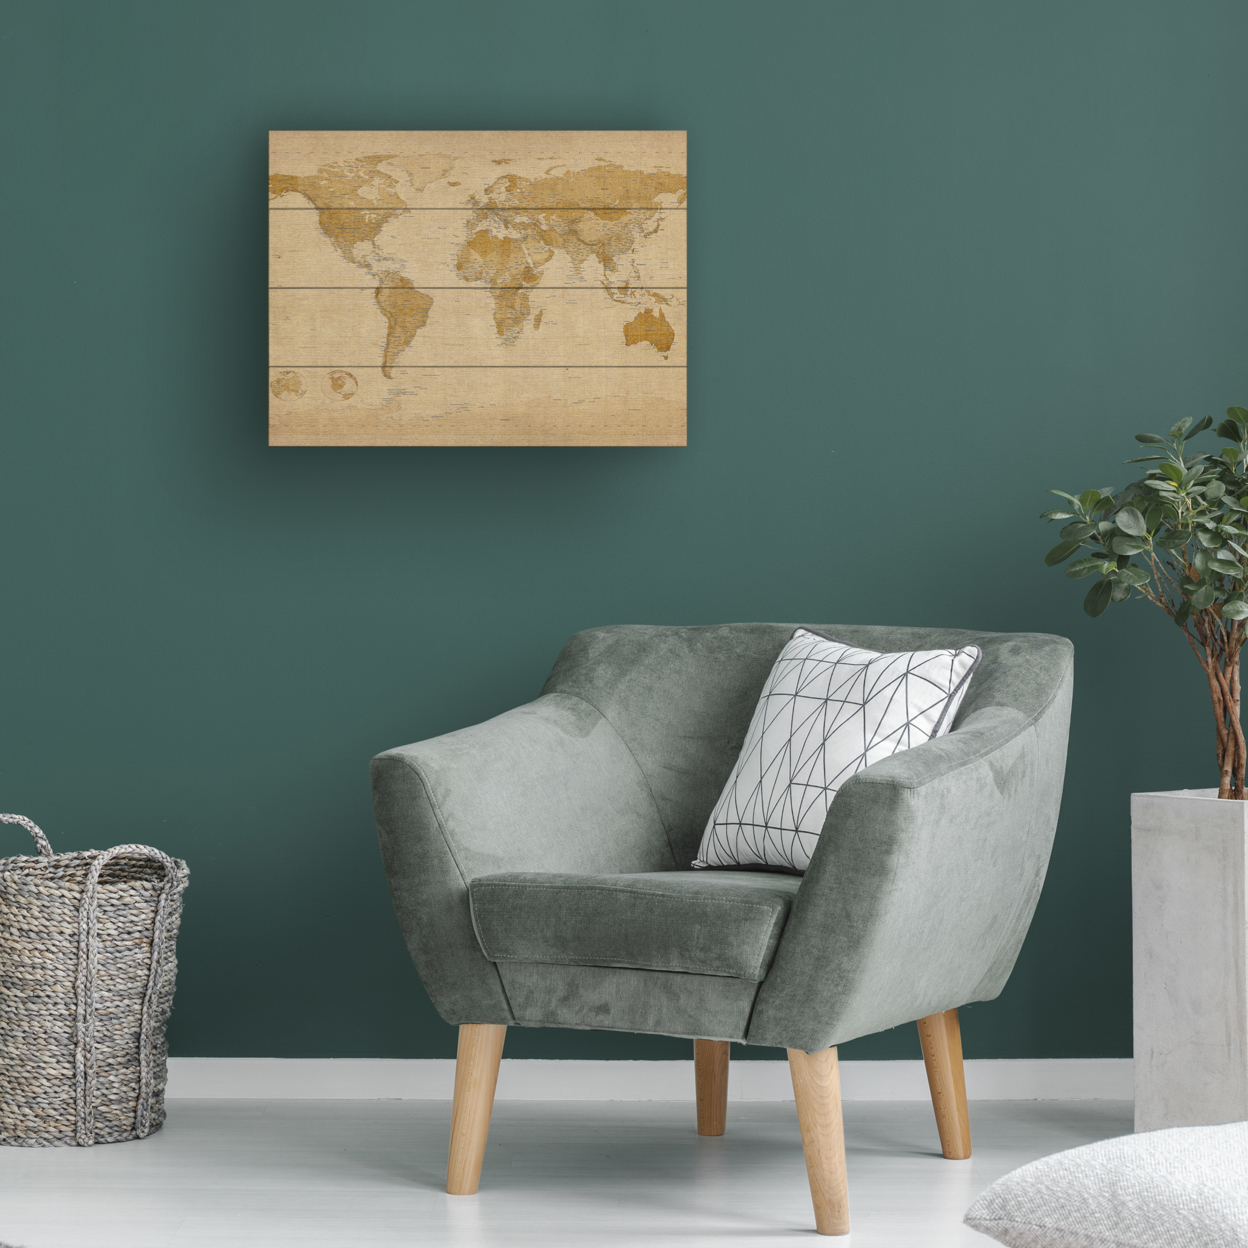 Wall Art 12 X 16 Inches Titled Antique World Map Ready To Hang Printed On Wooden Planks